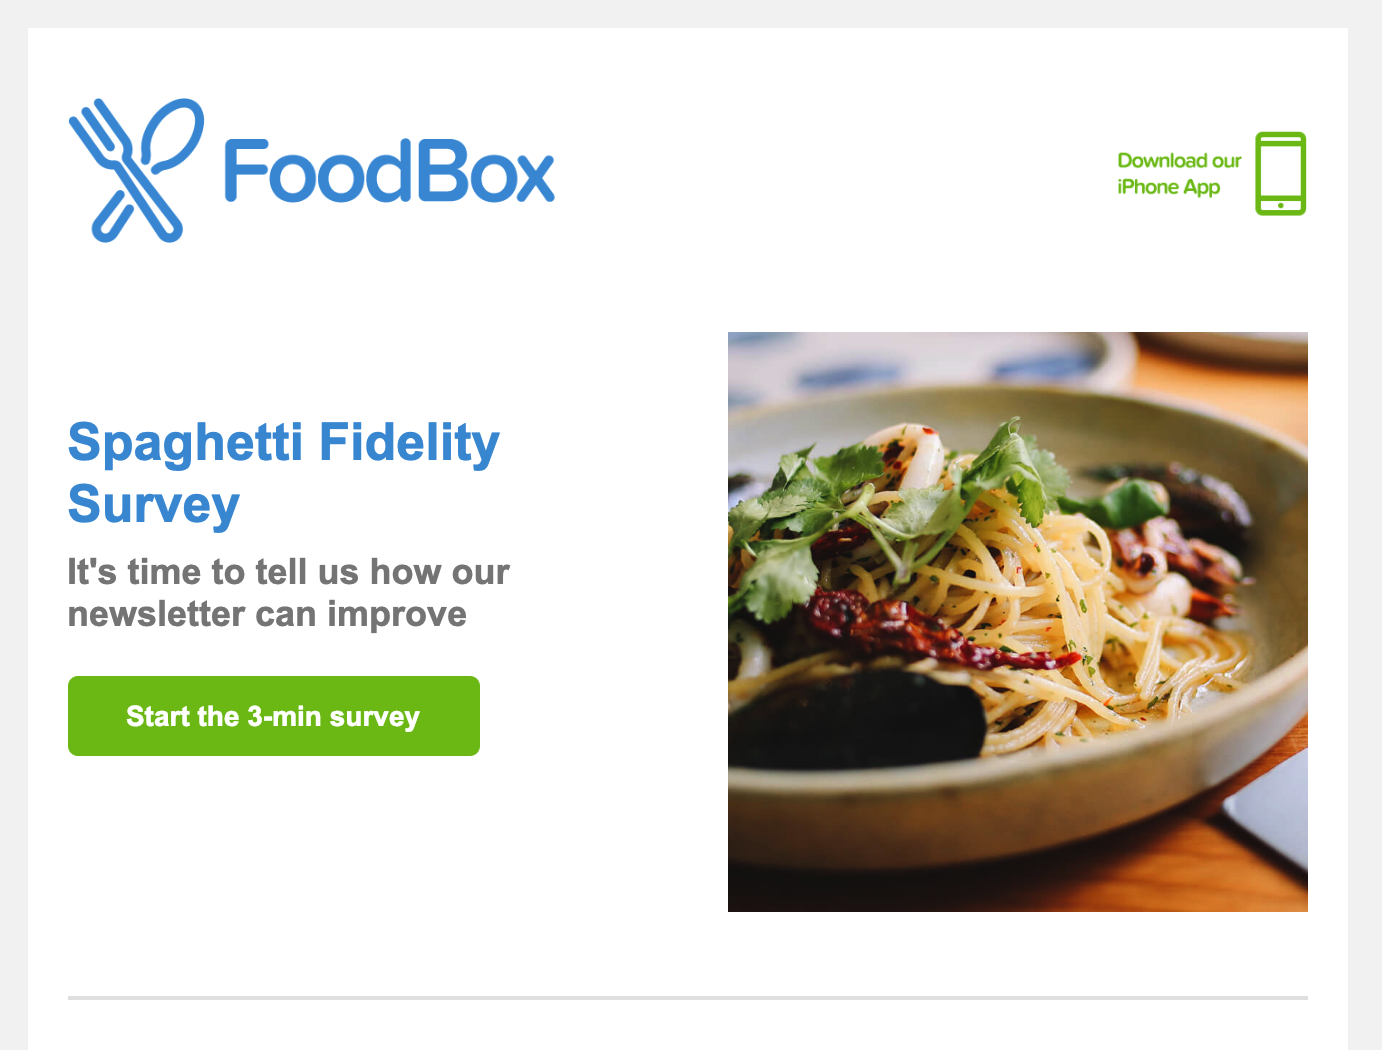 Food Box welcome email. 